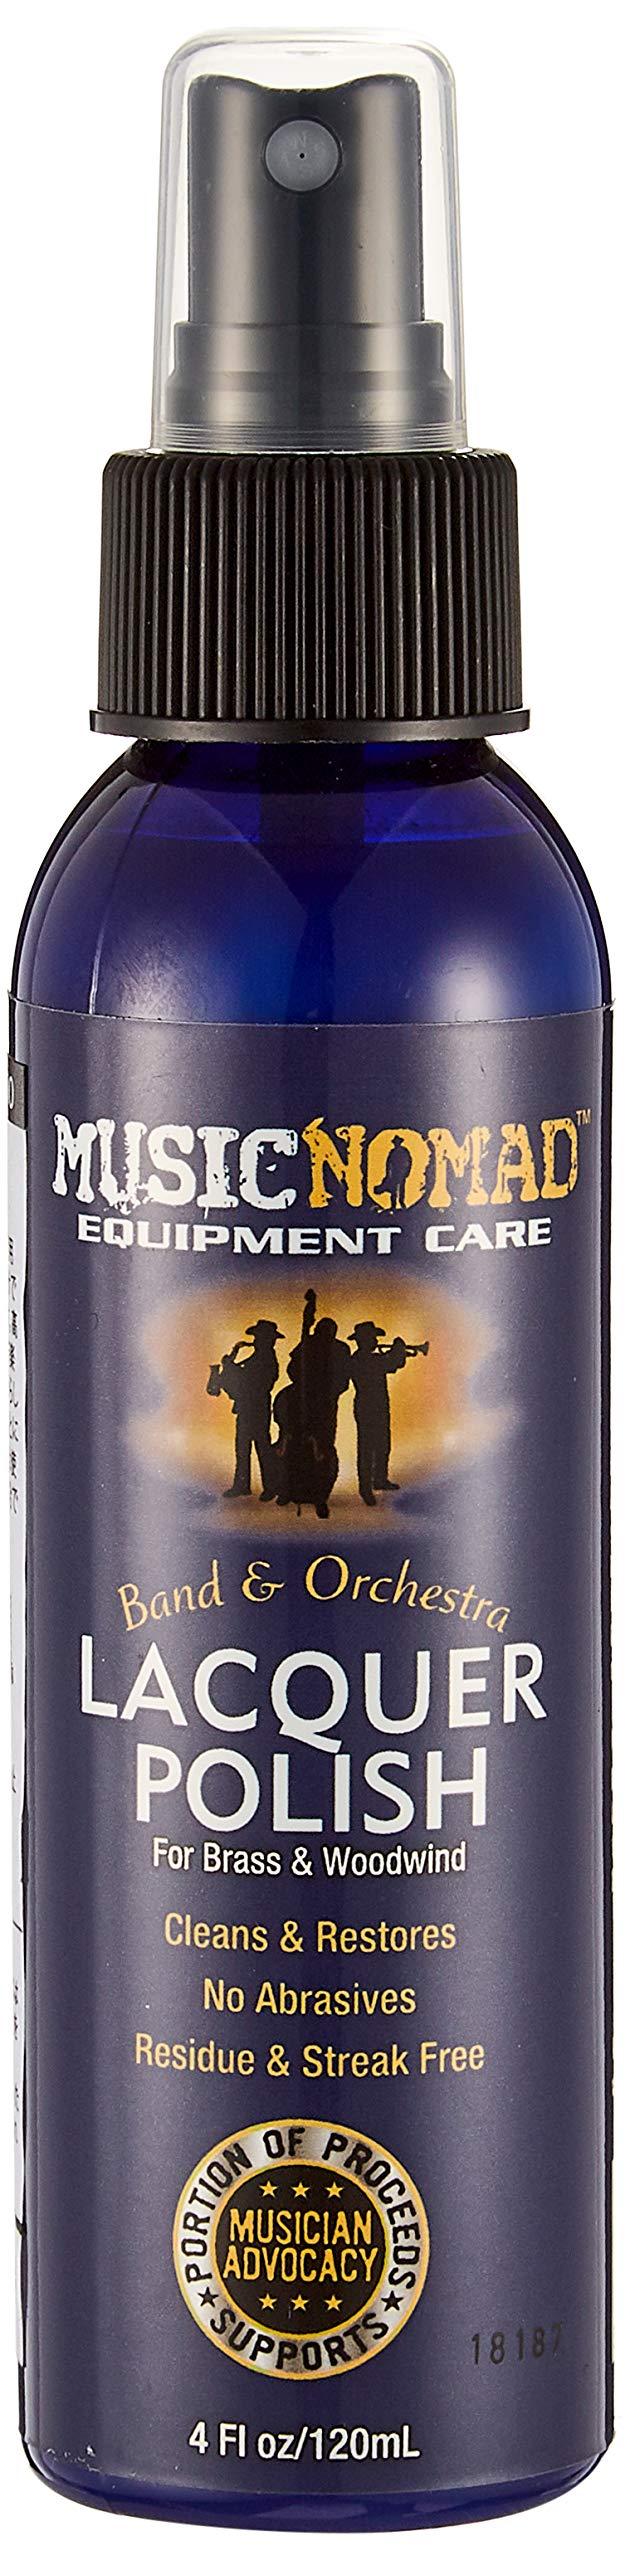 MusicNomad Lacquer Polish for Brass & Woodwind Instruments (MN700)